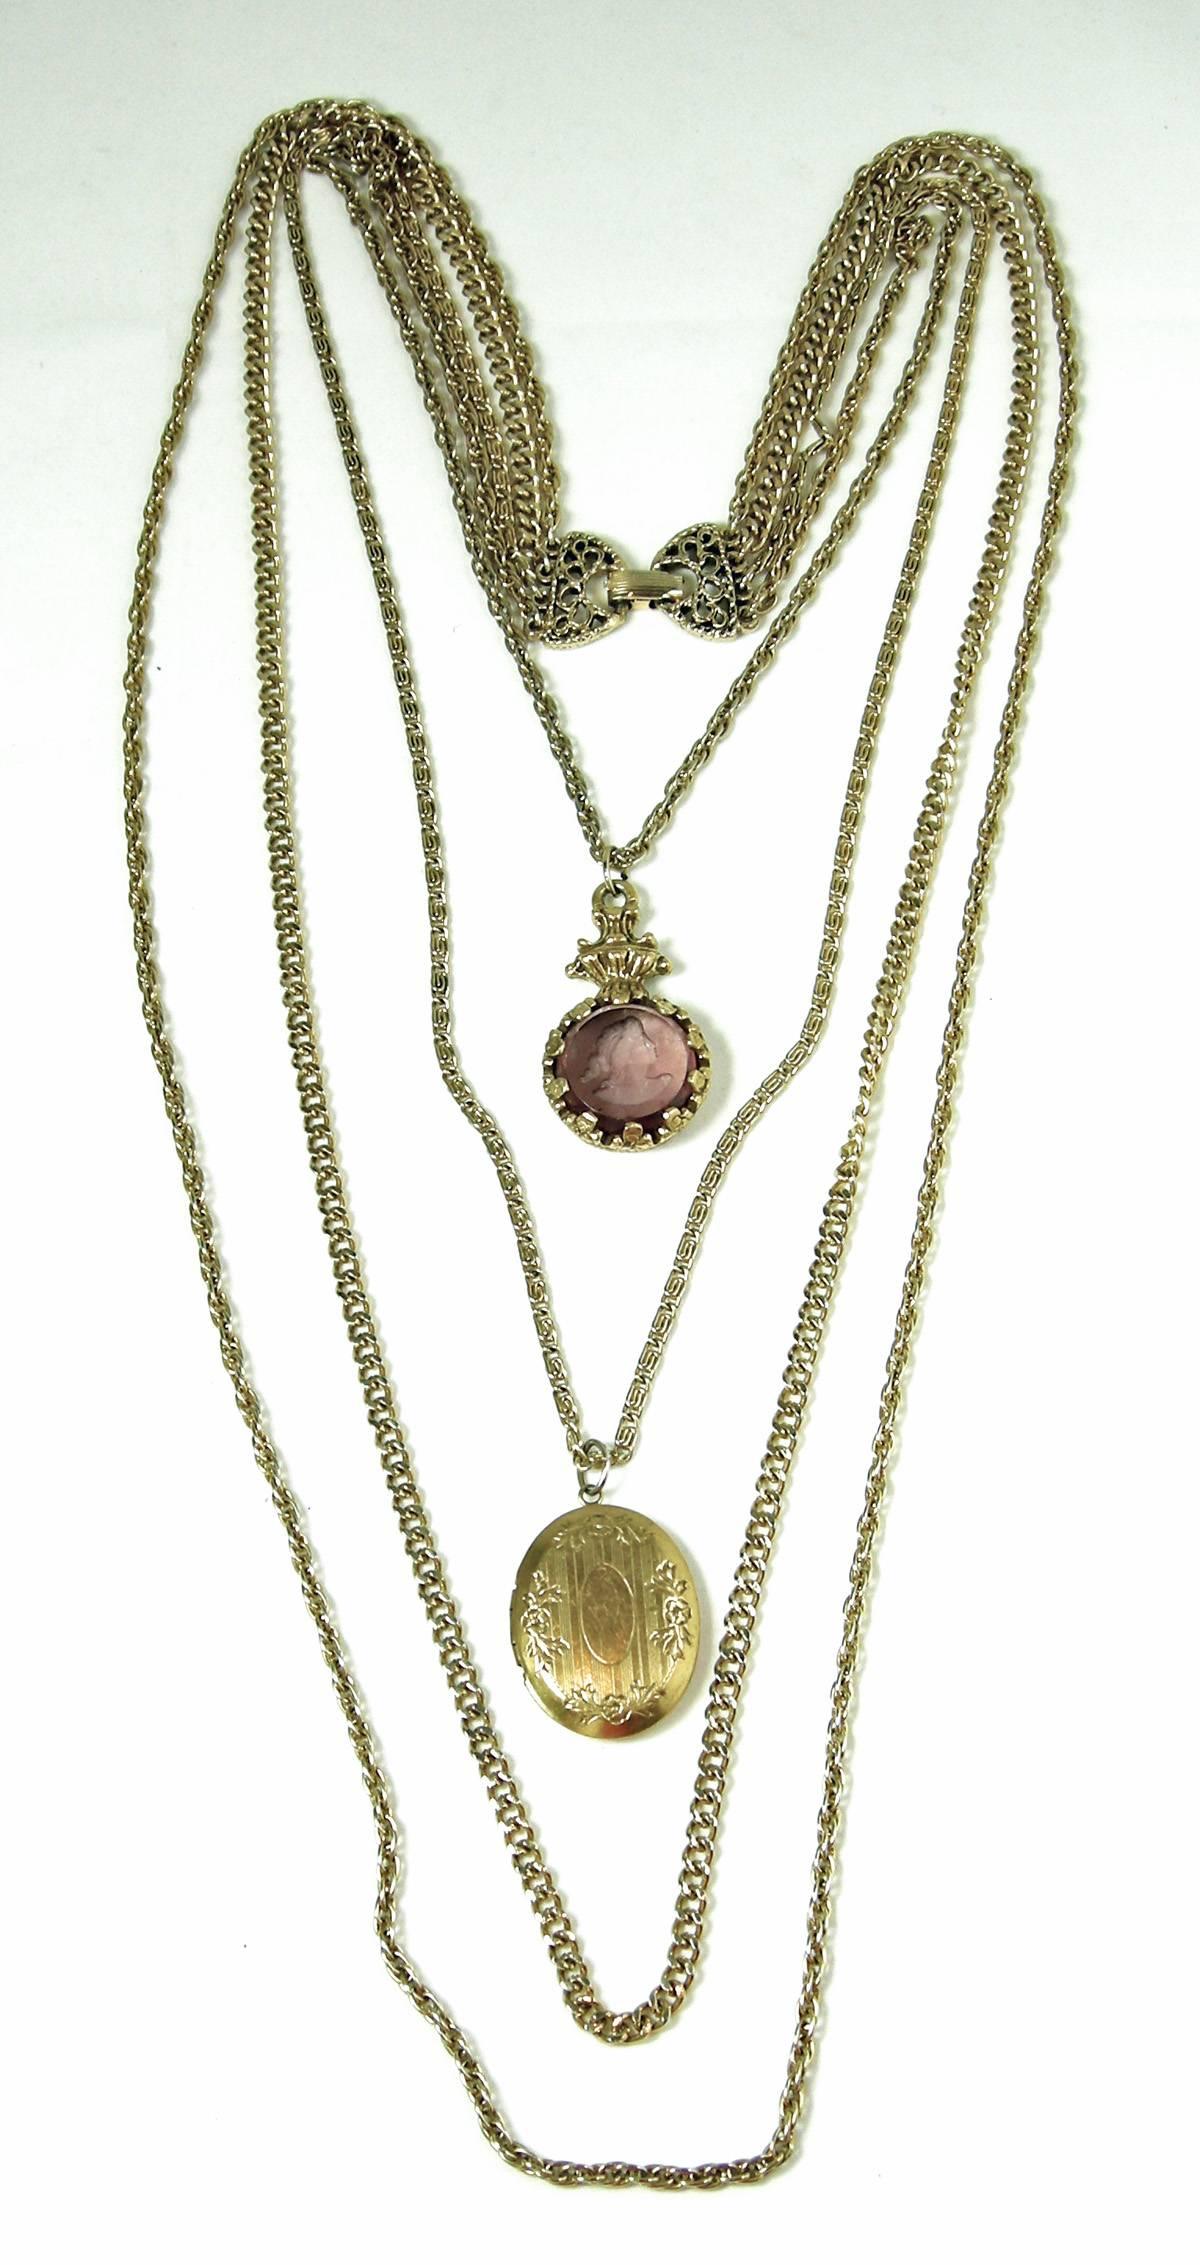  This vintage 1960s Goldette necklace is beautiful. It has 4 chains in a gold tone finish. The first chain is 19-1/2” x 1/4” with  a purple Intaglia cameo hanging in the middle. The second chain measures 21” x 1/4